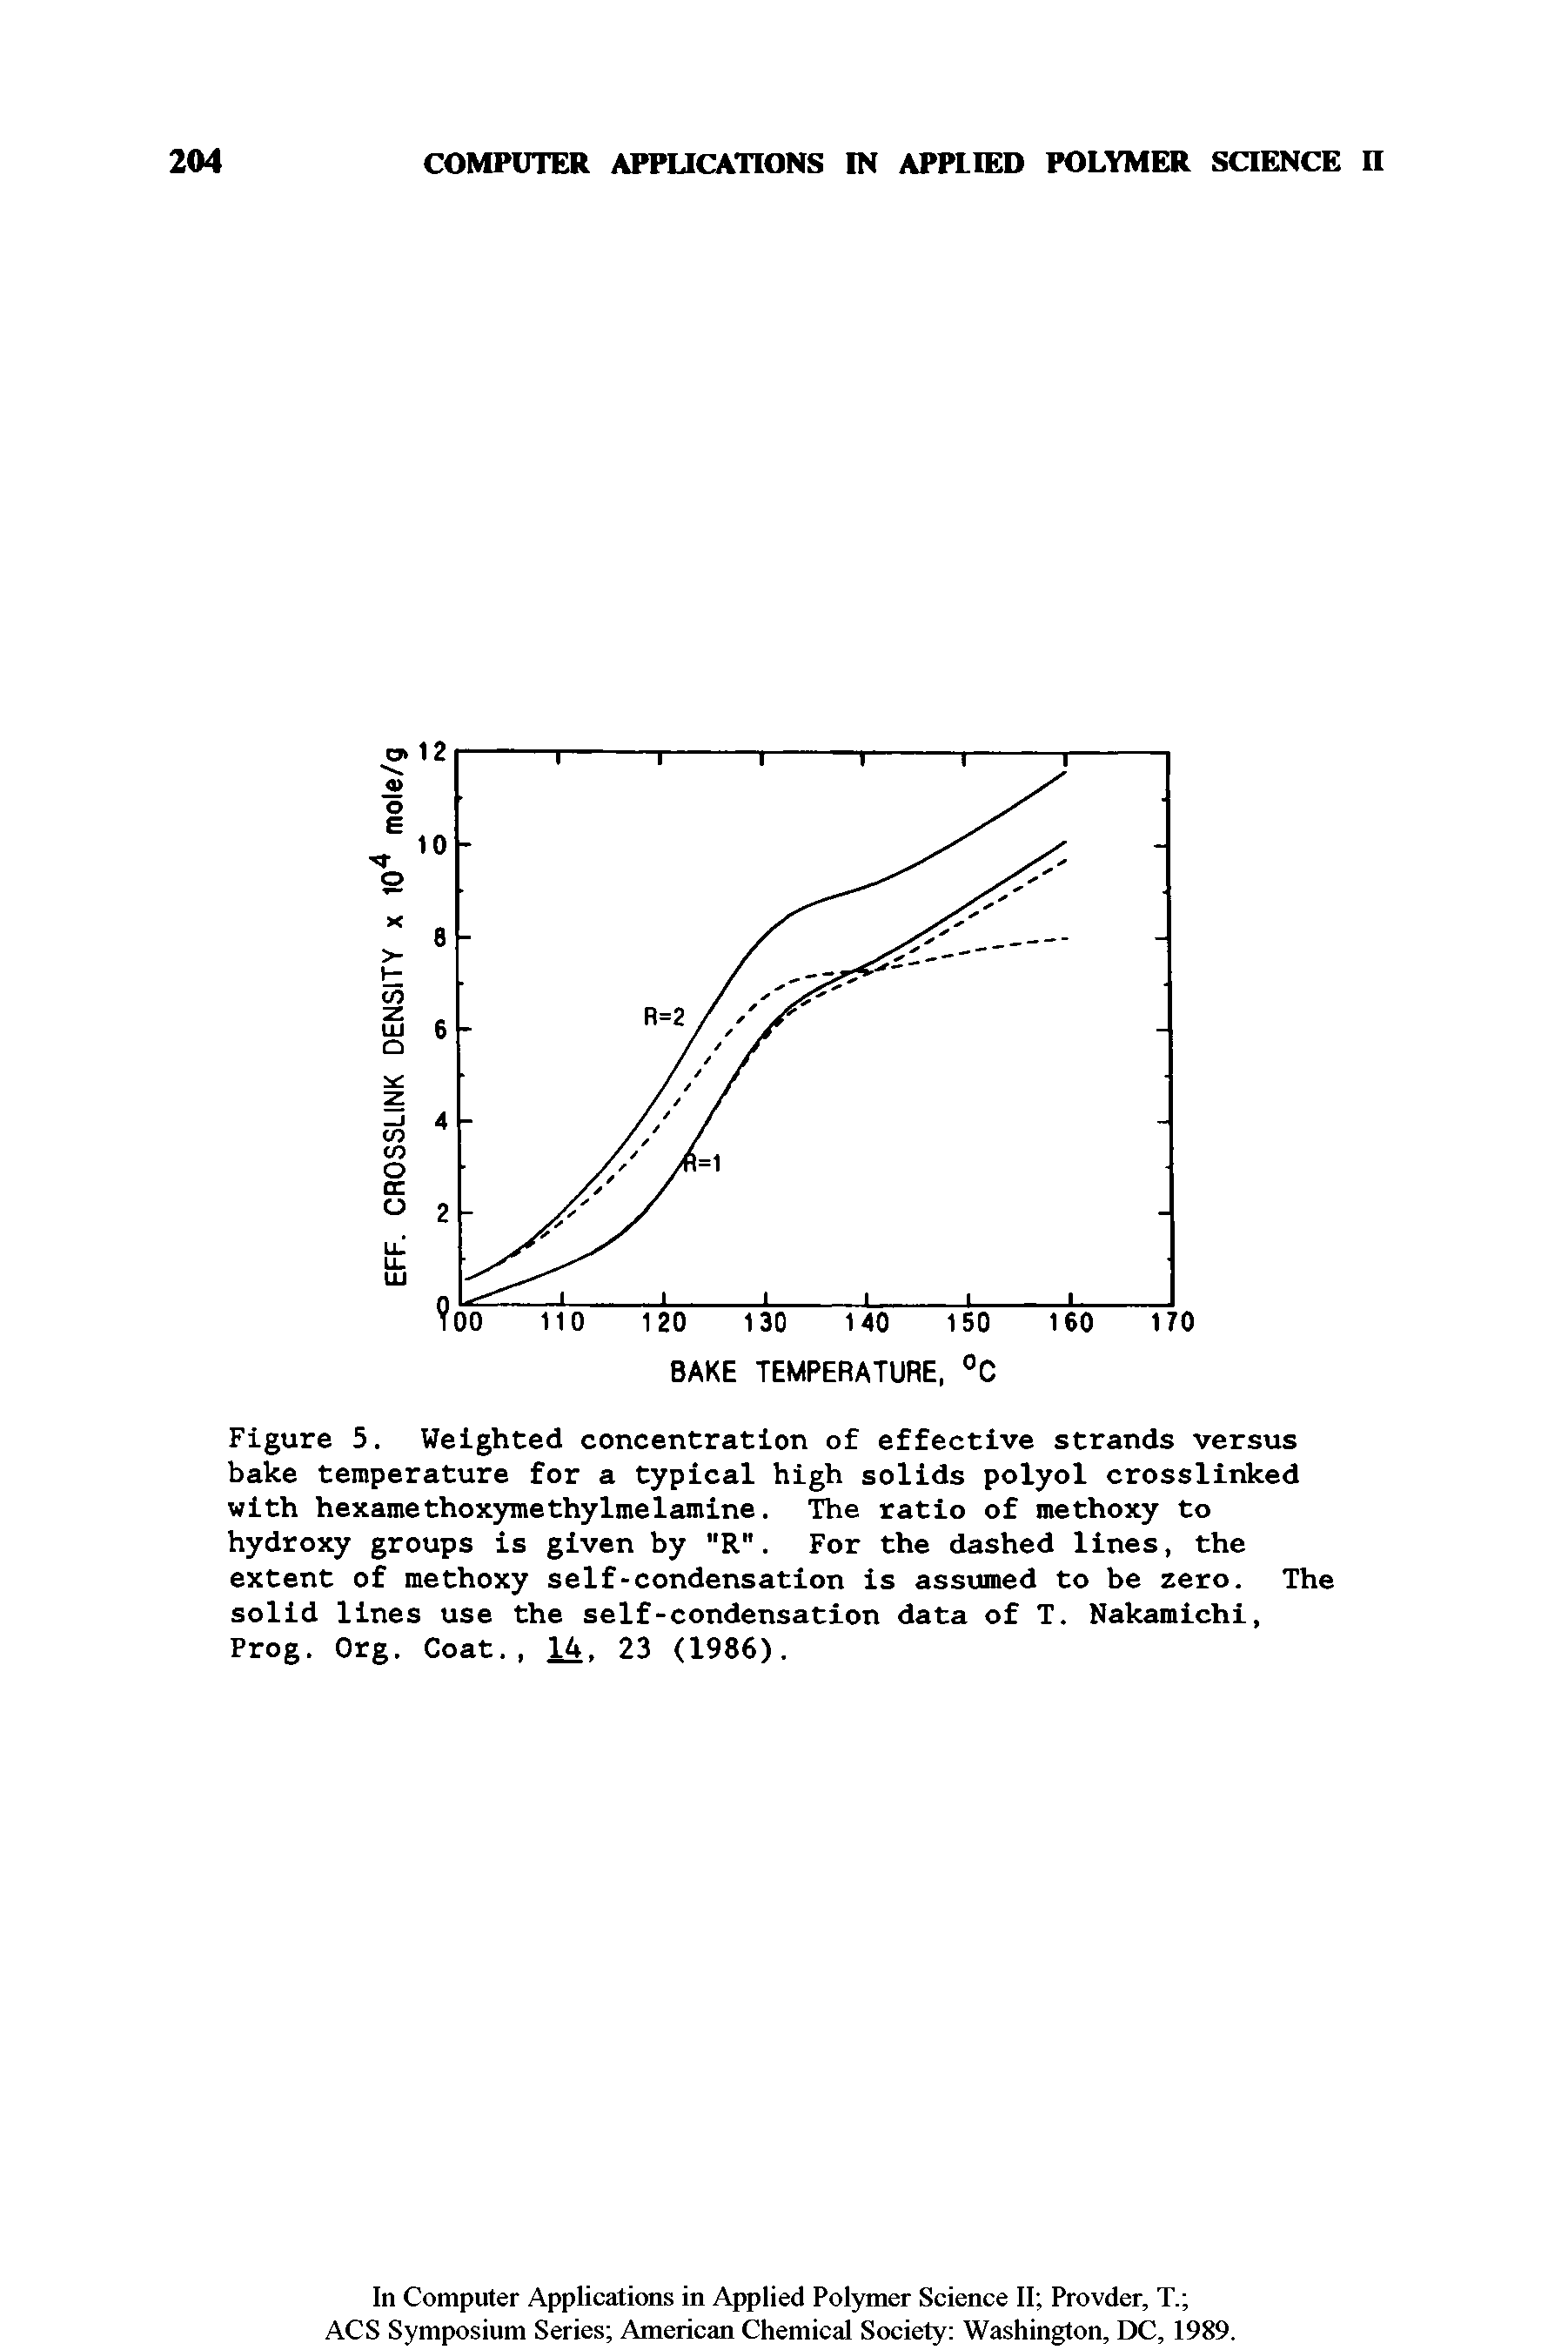 Figure 5. Weighted concentration of effective strands versus bake temperature for a typical high solids polyol crosslinked with hexamethoxymethylmelamine. The ratio of methoxy to hydroxy groups is given by "R". For the dashed lines, the extent of methoxy self-condensation is assumed to be zero. The solid lines use the self-condensation data of T. Nakamichi, Prog. Org. Coat., 14, 23 (1986).